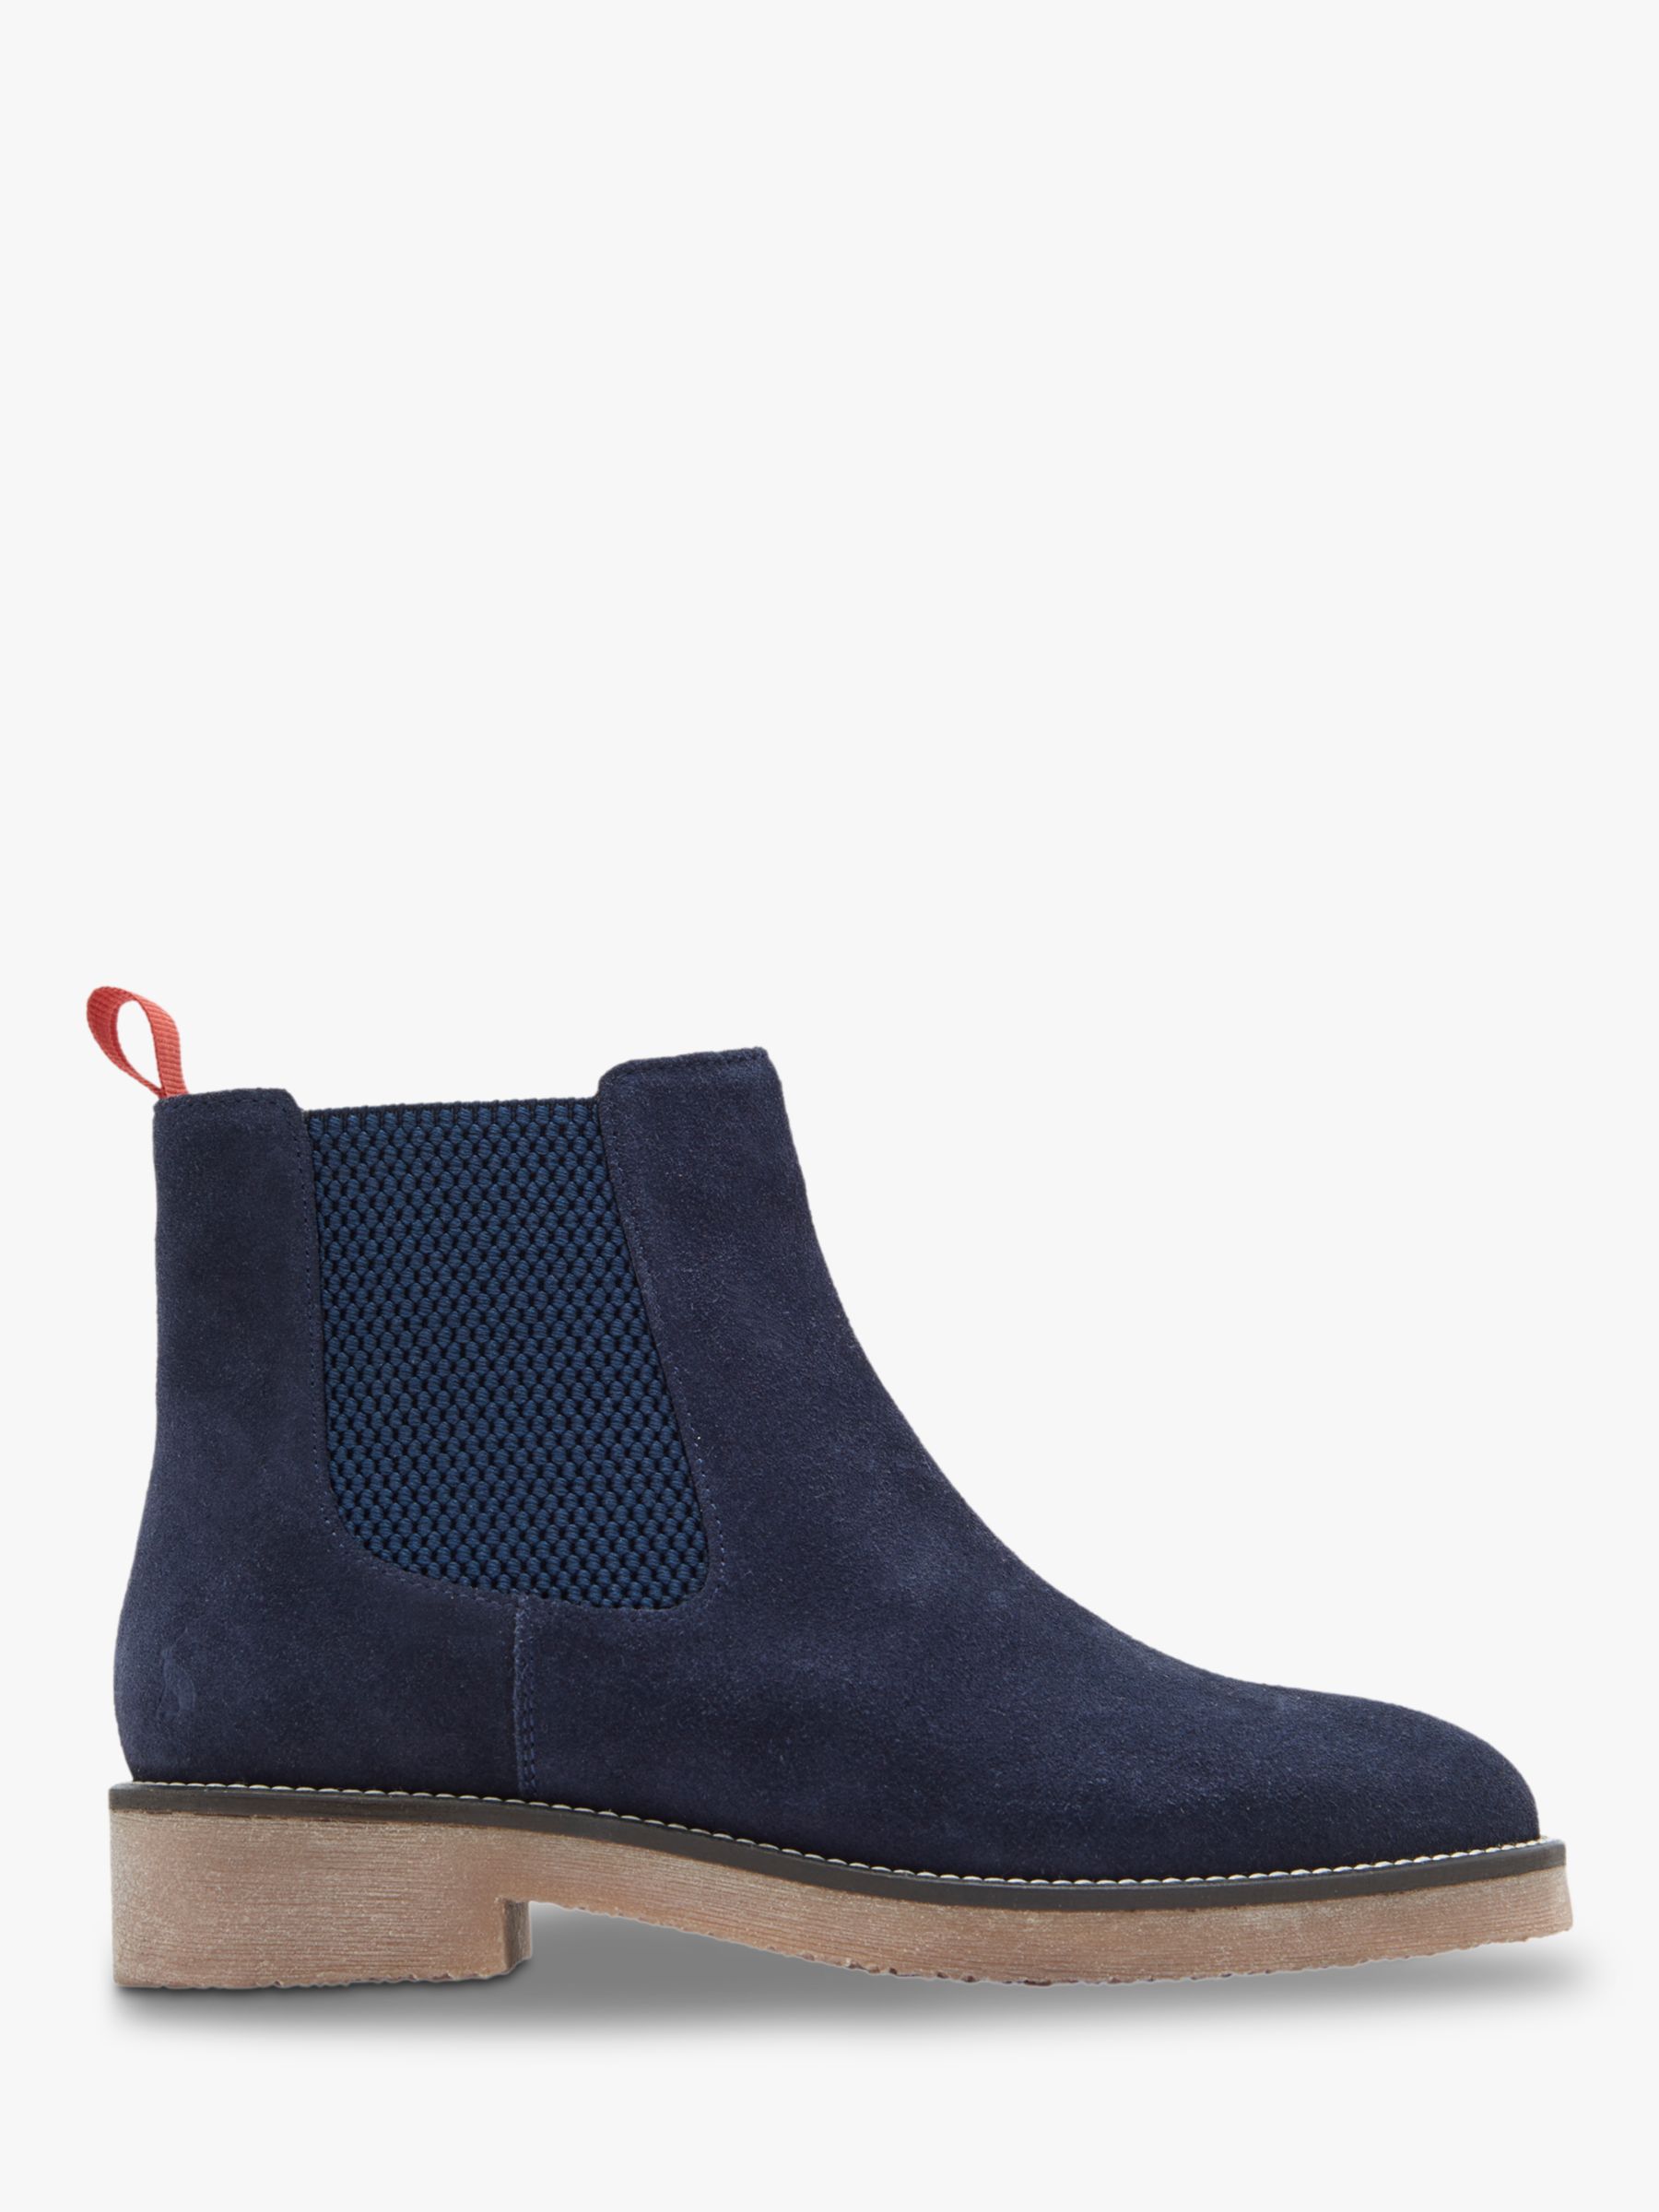 Joules Chepstow Suede Chelsea Boots, Navy